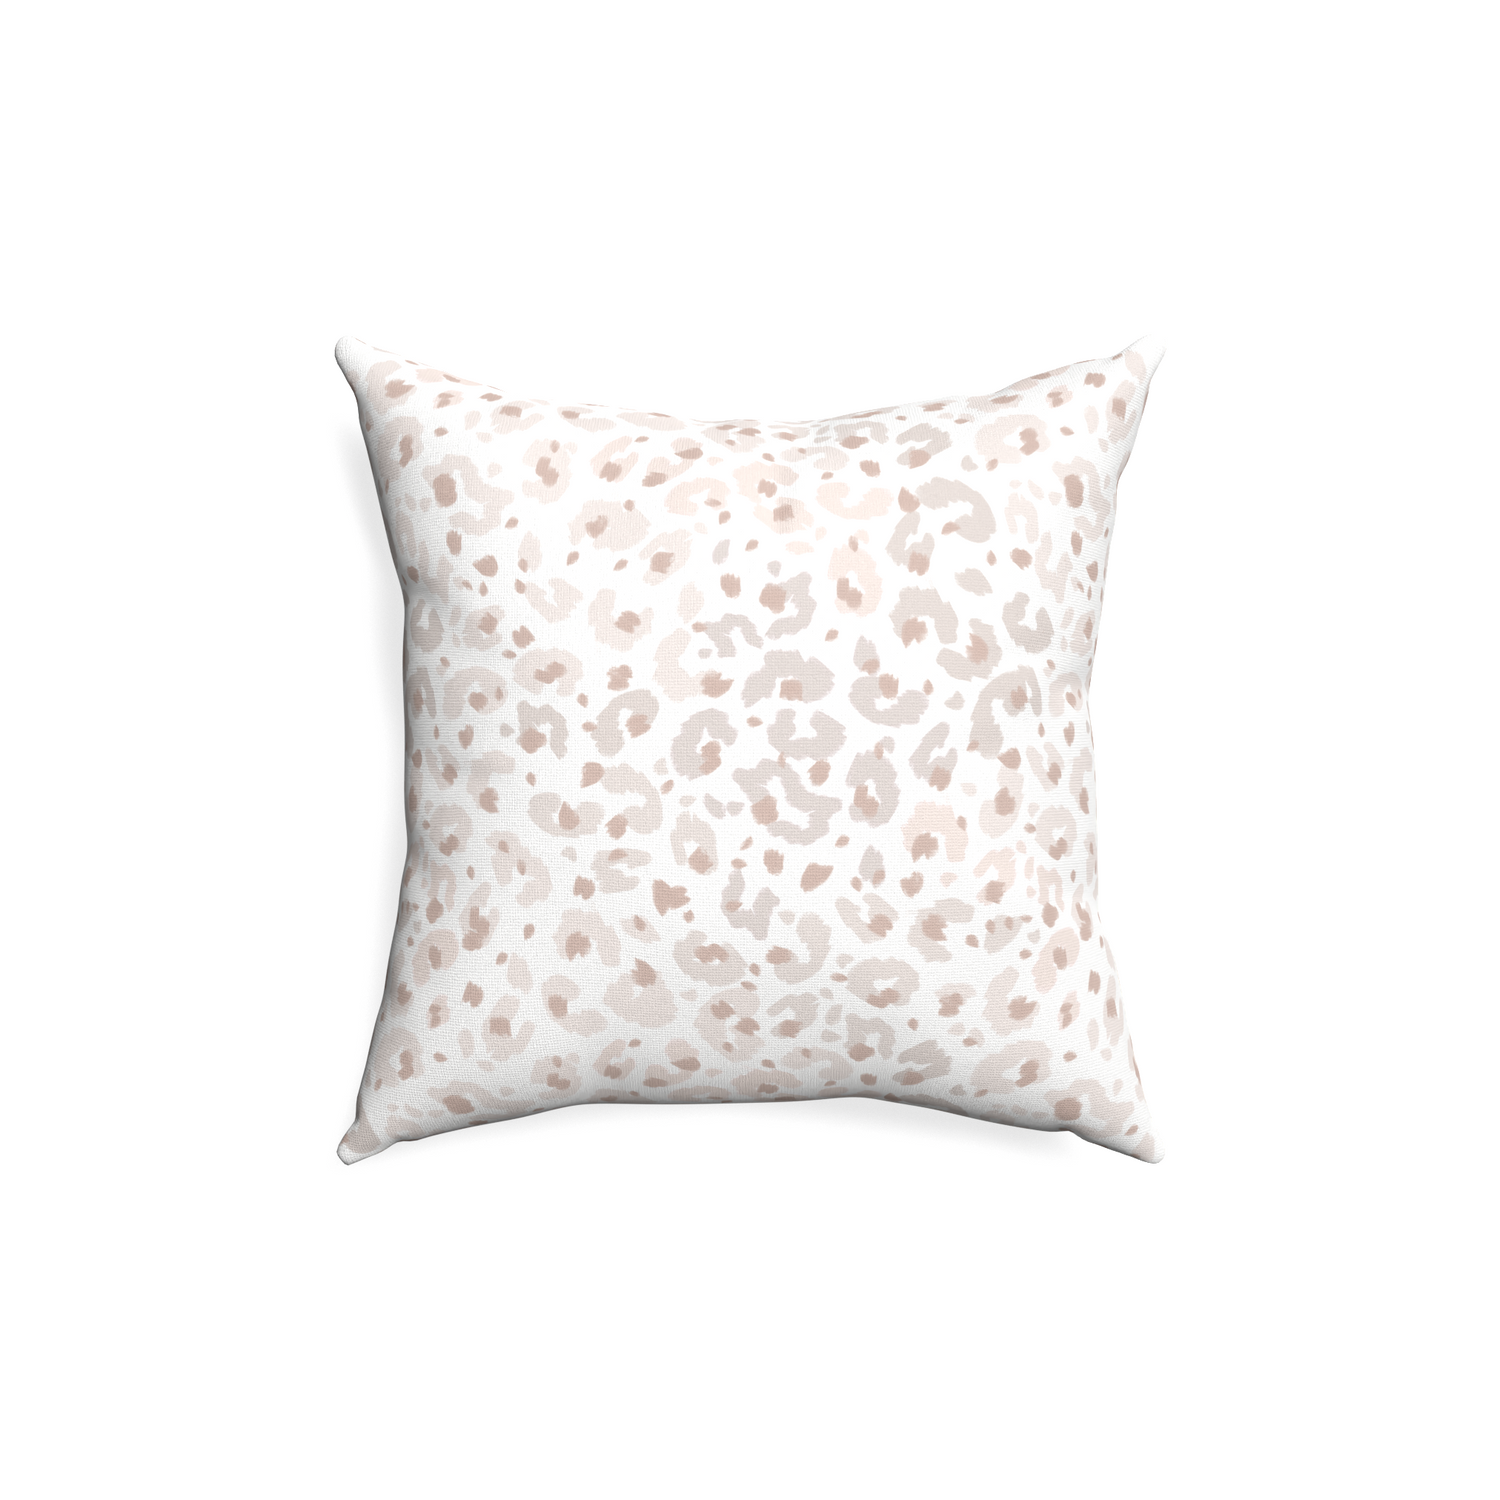 18-square rosie custom beige animal printpillow with none on white background